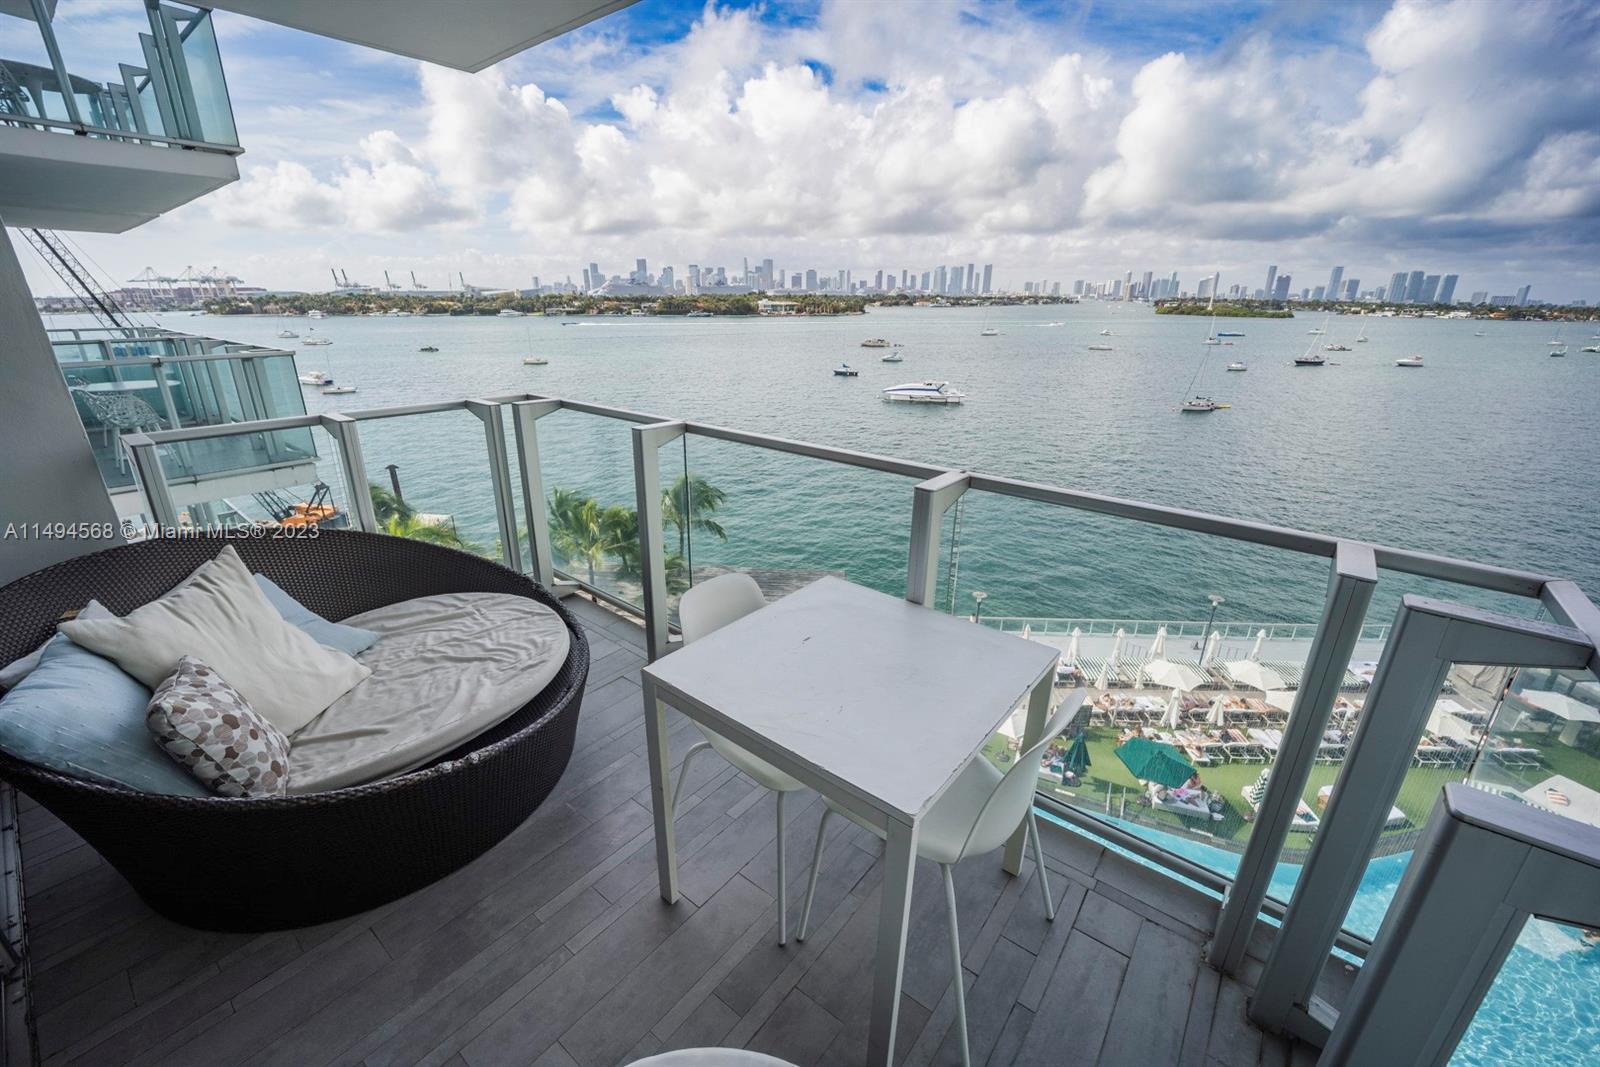 This unit is located at the luxurious Mondrian South Beach. This property has stunning direct bay vi